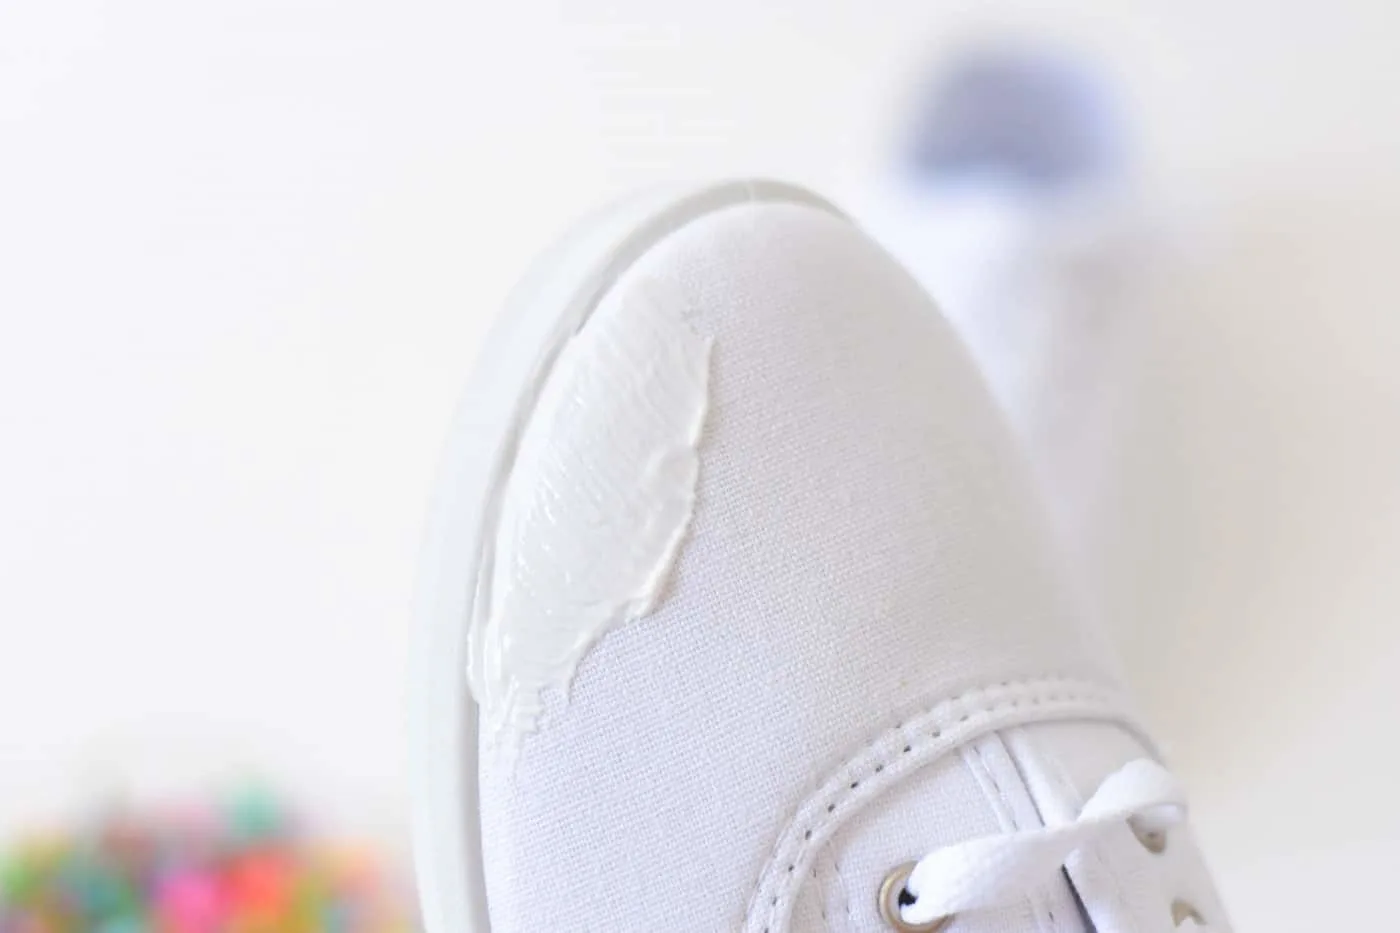 Mod Podge applied to the toe of a white shoe